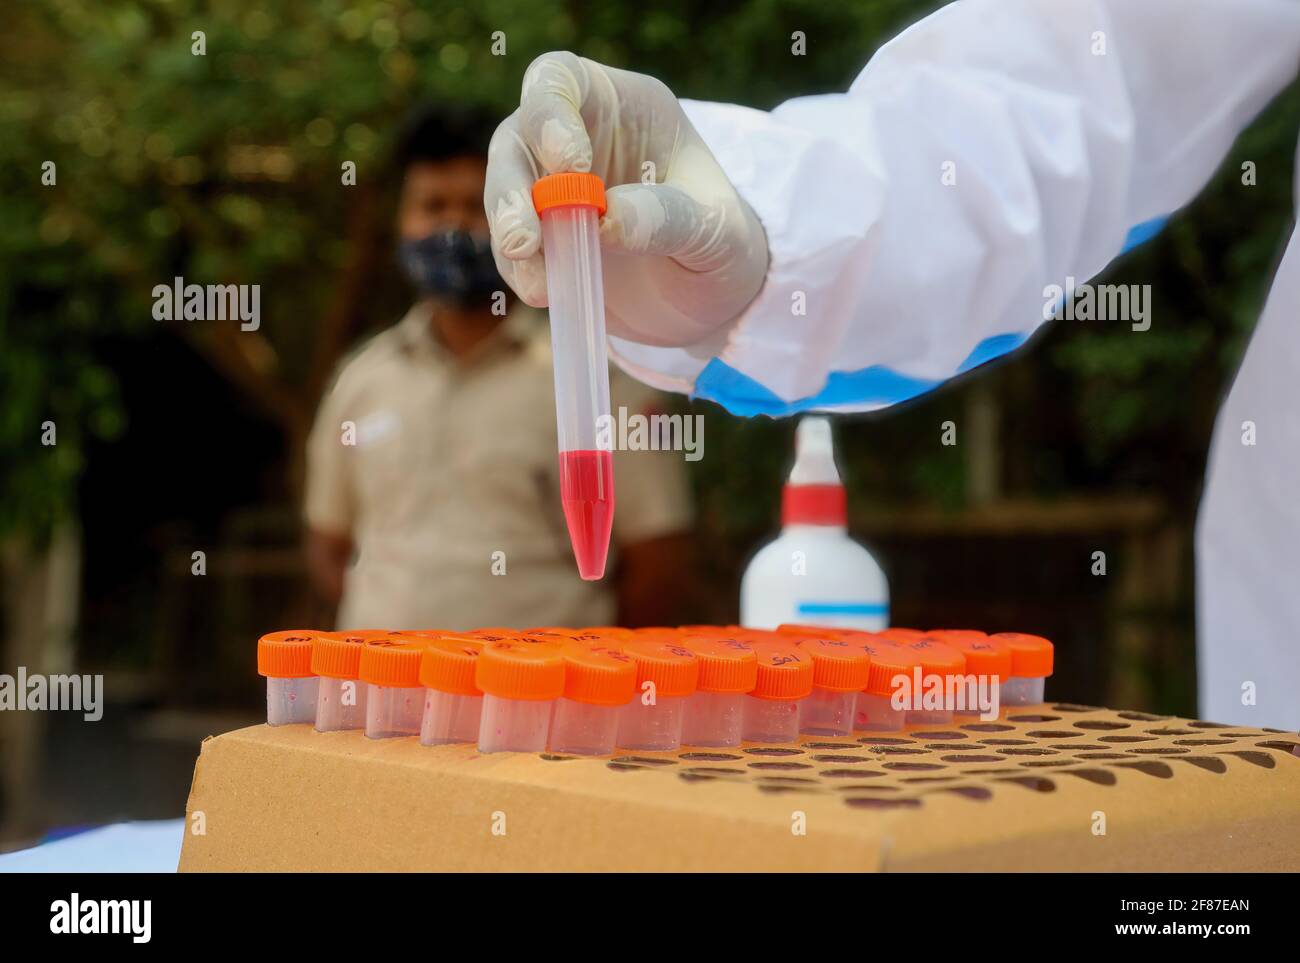 New Delhi, India. 12th Apr, 2021. A healthcare worker wearing a personal protective equipment (PPE) places a mouth swab sample vial into a box after Covid-19 Reverse Transcription Polymerase Chain Reaction (RT-PCR) test at the road side testing centre Wazzirpur industrial area in New Delhi. India registered 168,912 new Covid-19 cases, the highest single-day spike and 904 deaths in the last 24 hours. Credit: SOPA Images Limited/Alamy Live News Stock Photo